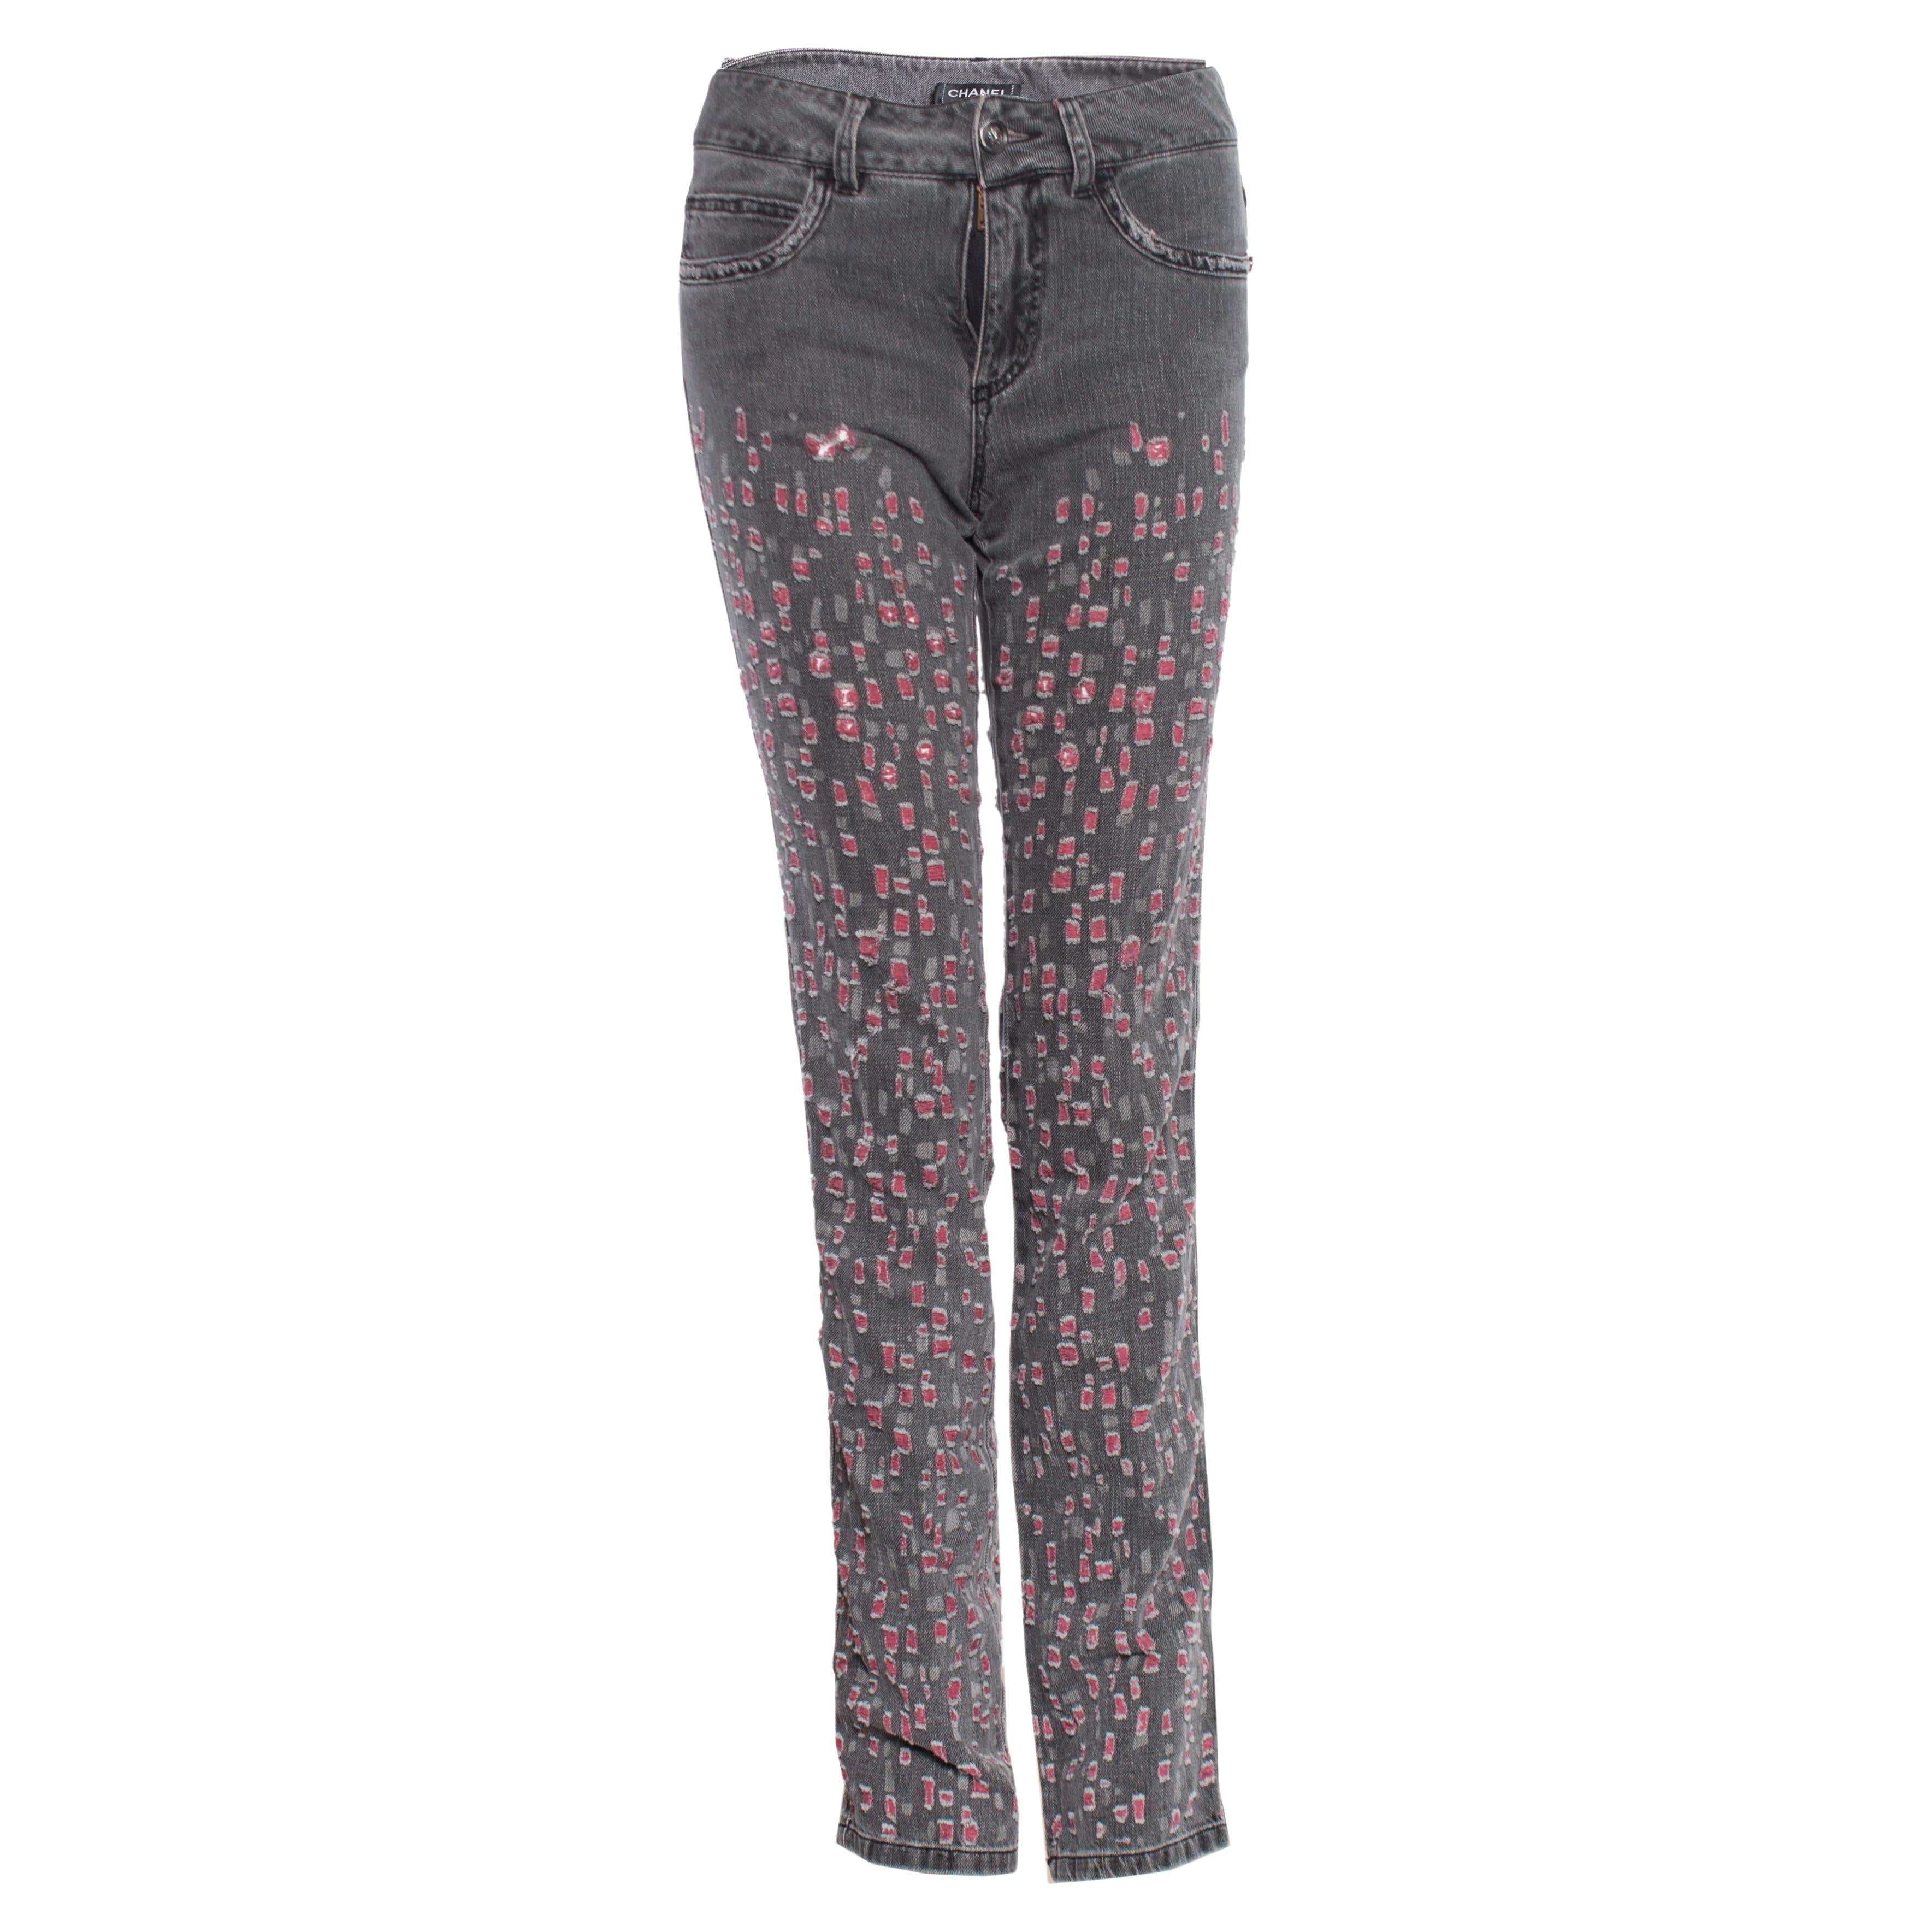 Chanel, Grey washout jeans with pink teared details